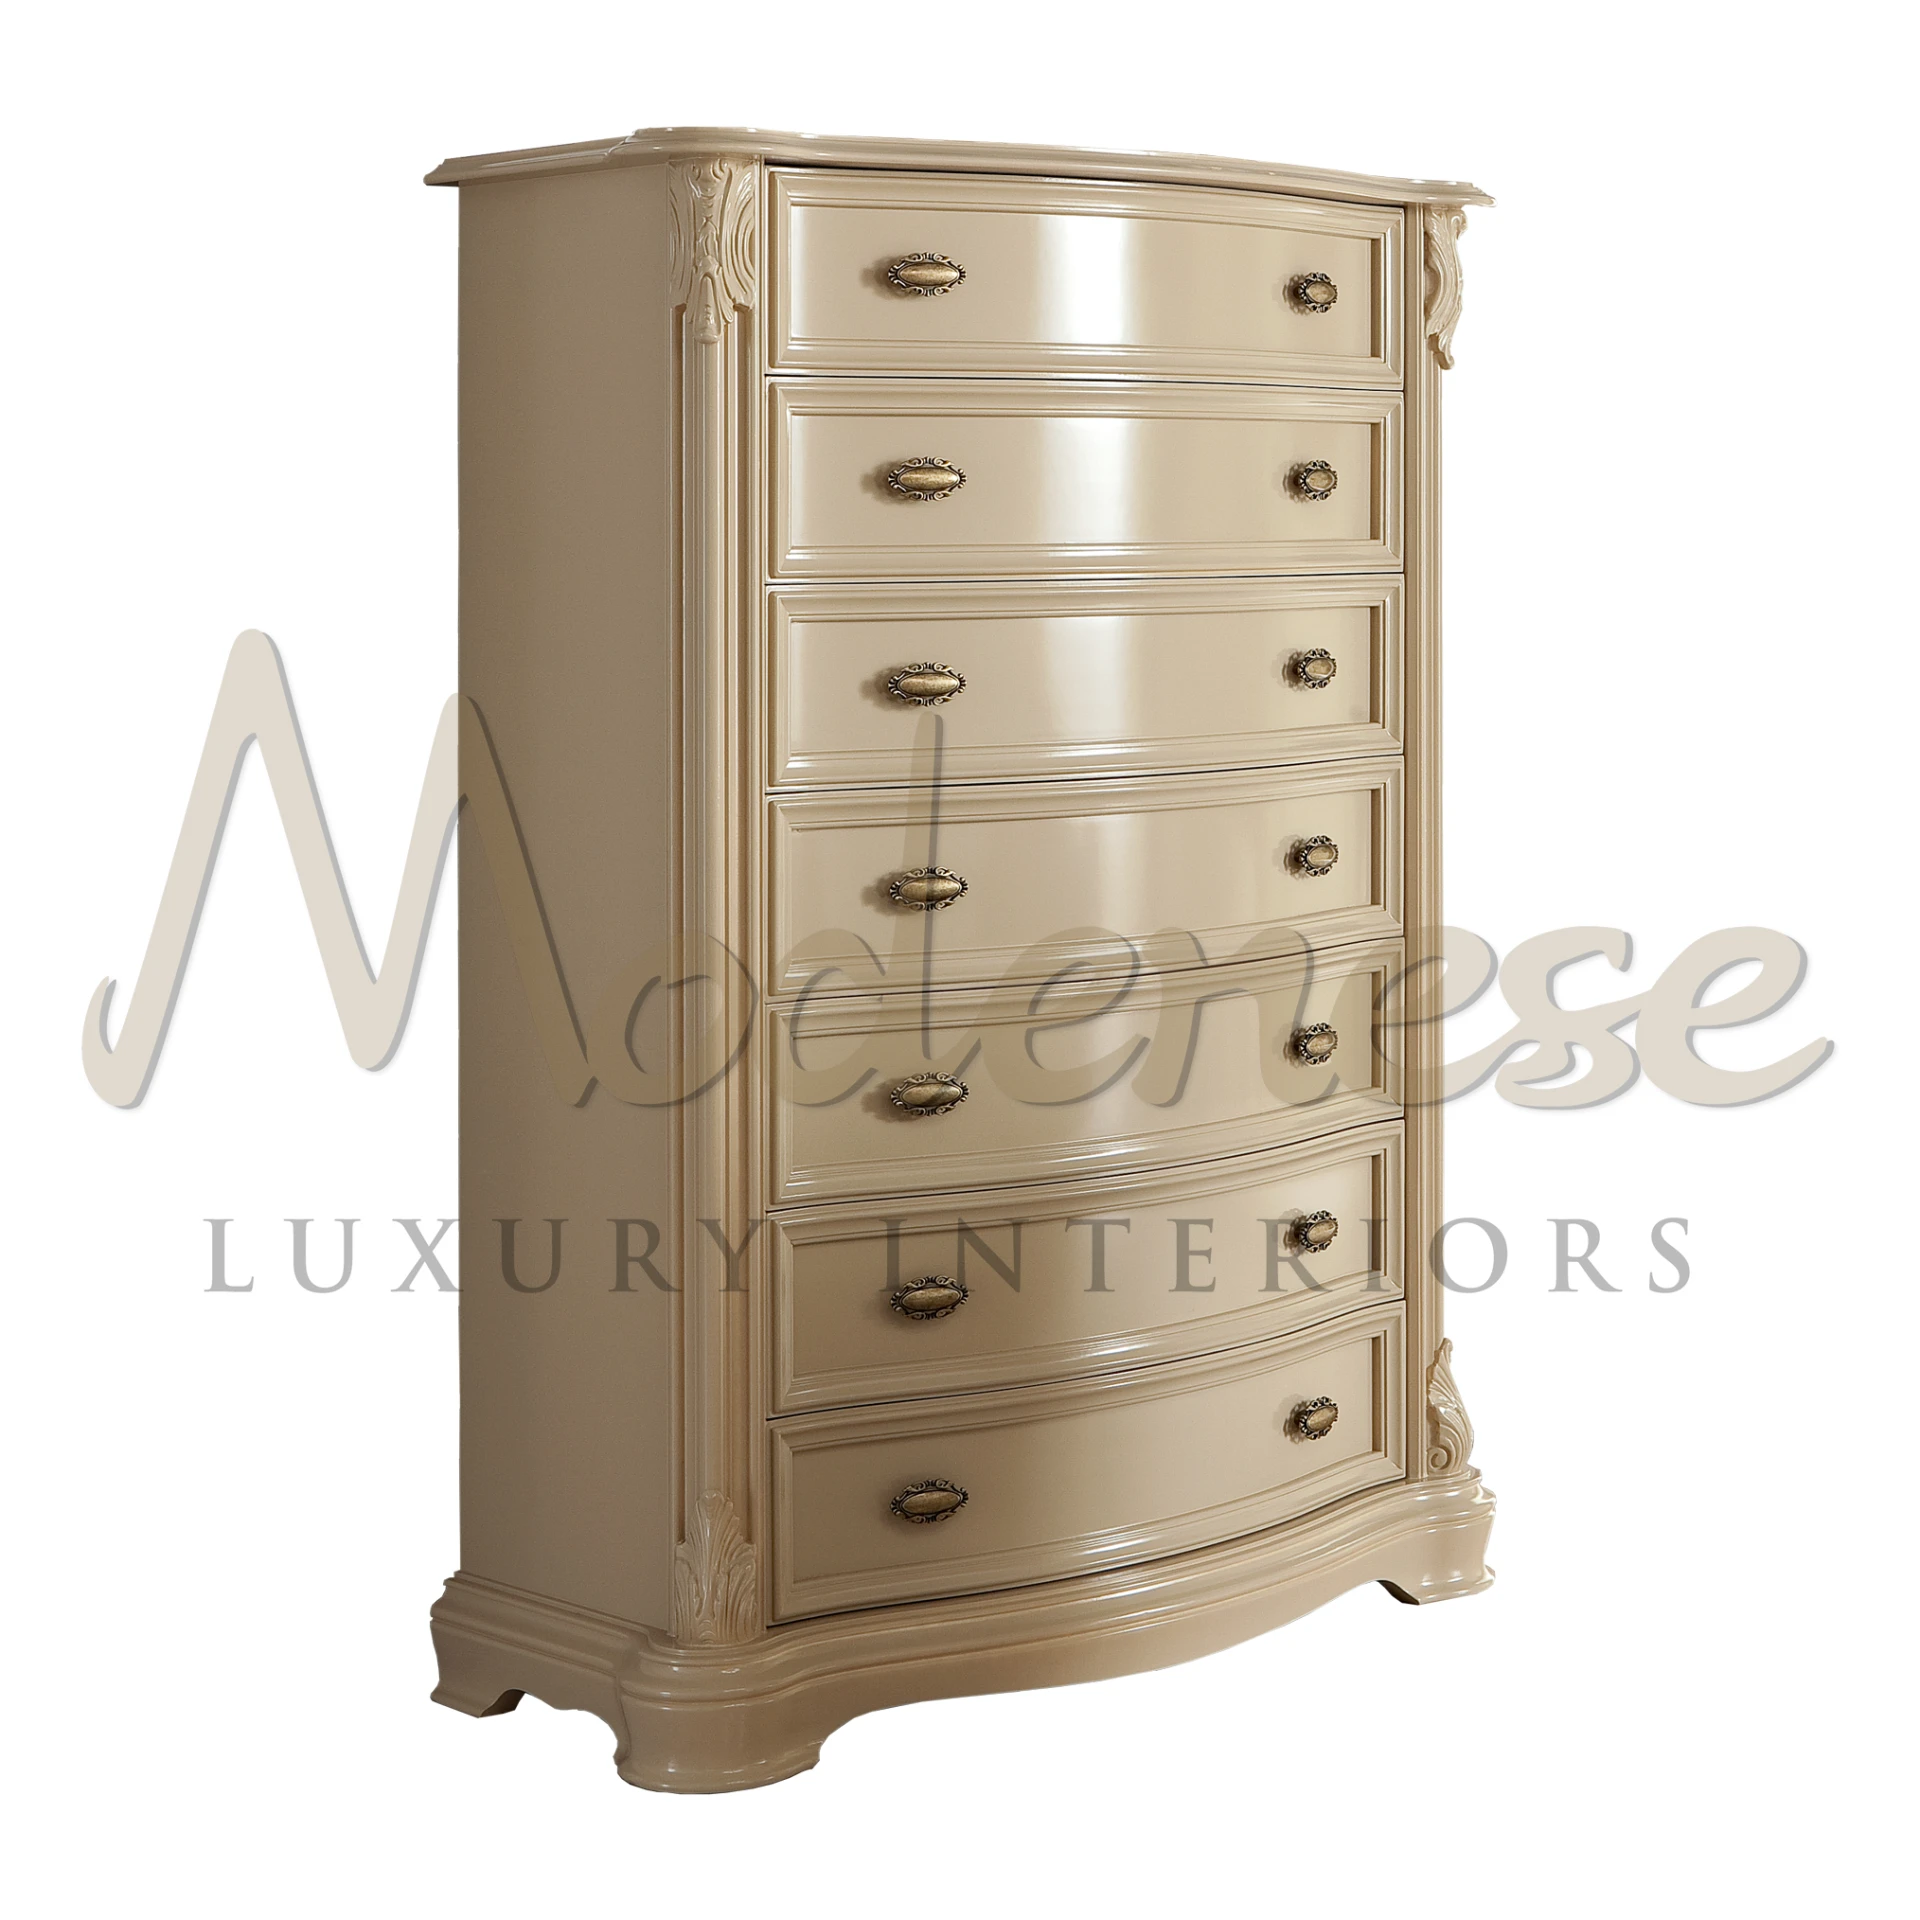 Classic cream tall chest of drawers with ornate metal handles and detailed trim                                                                              